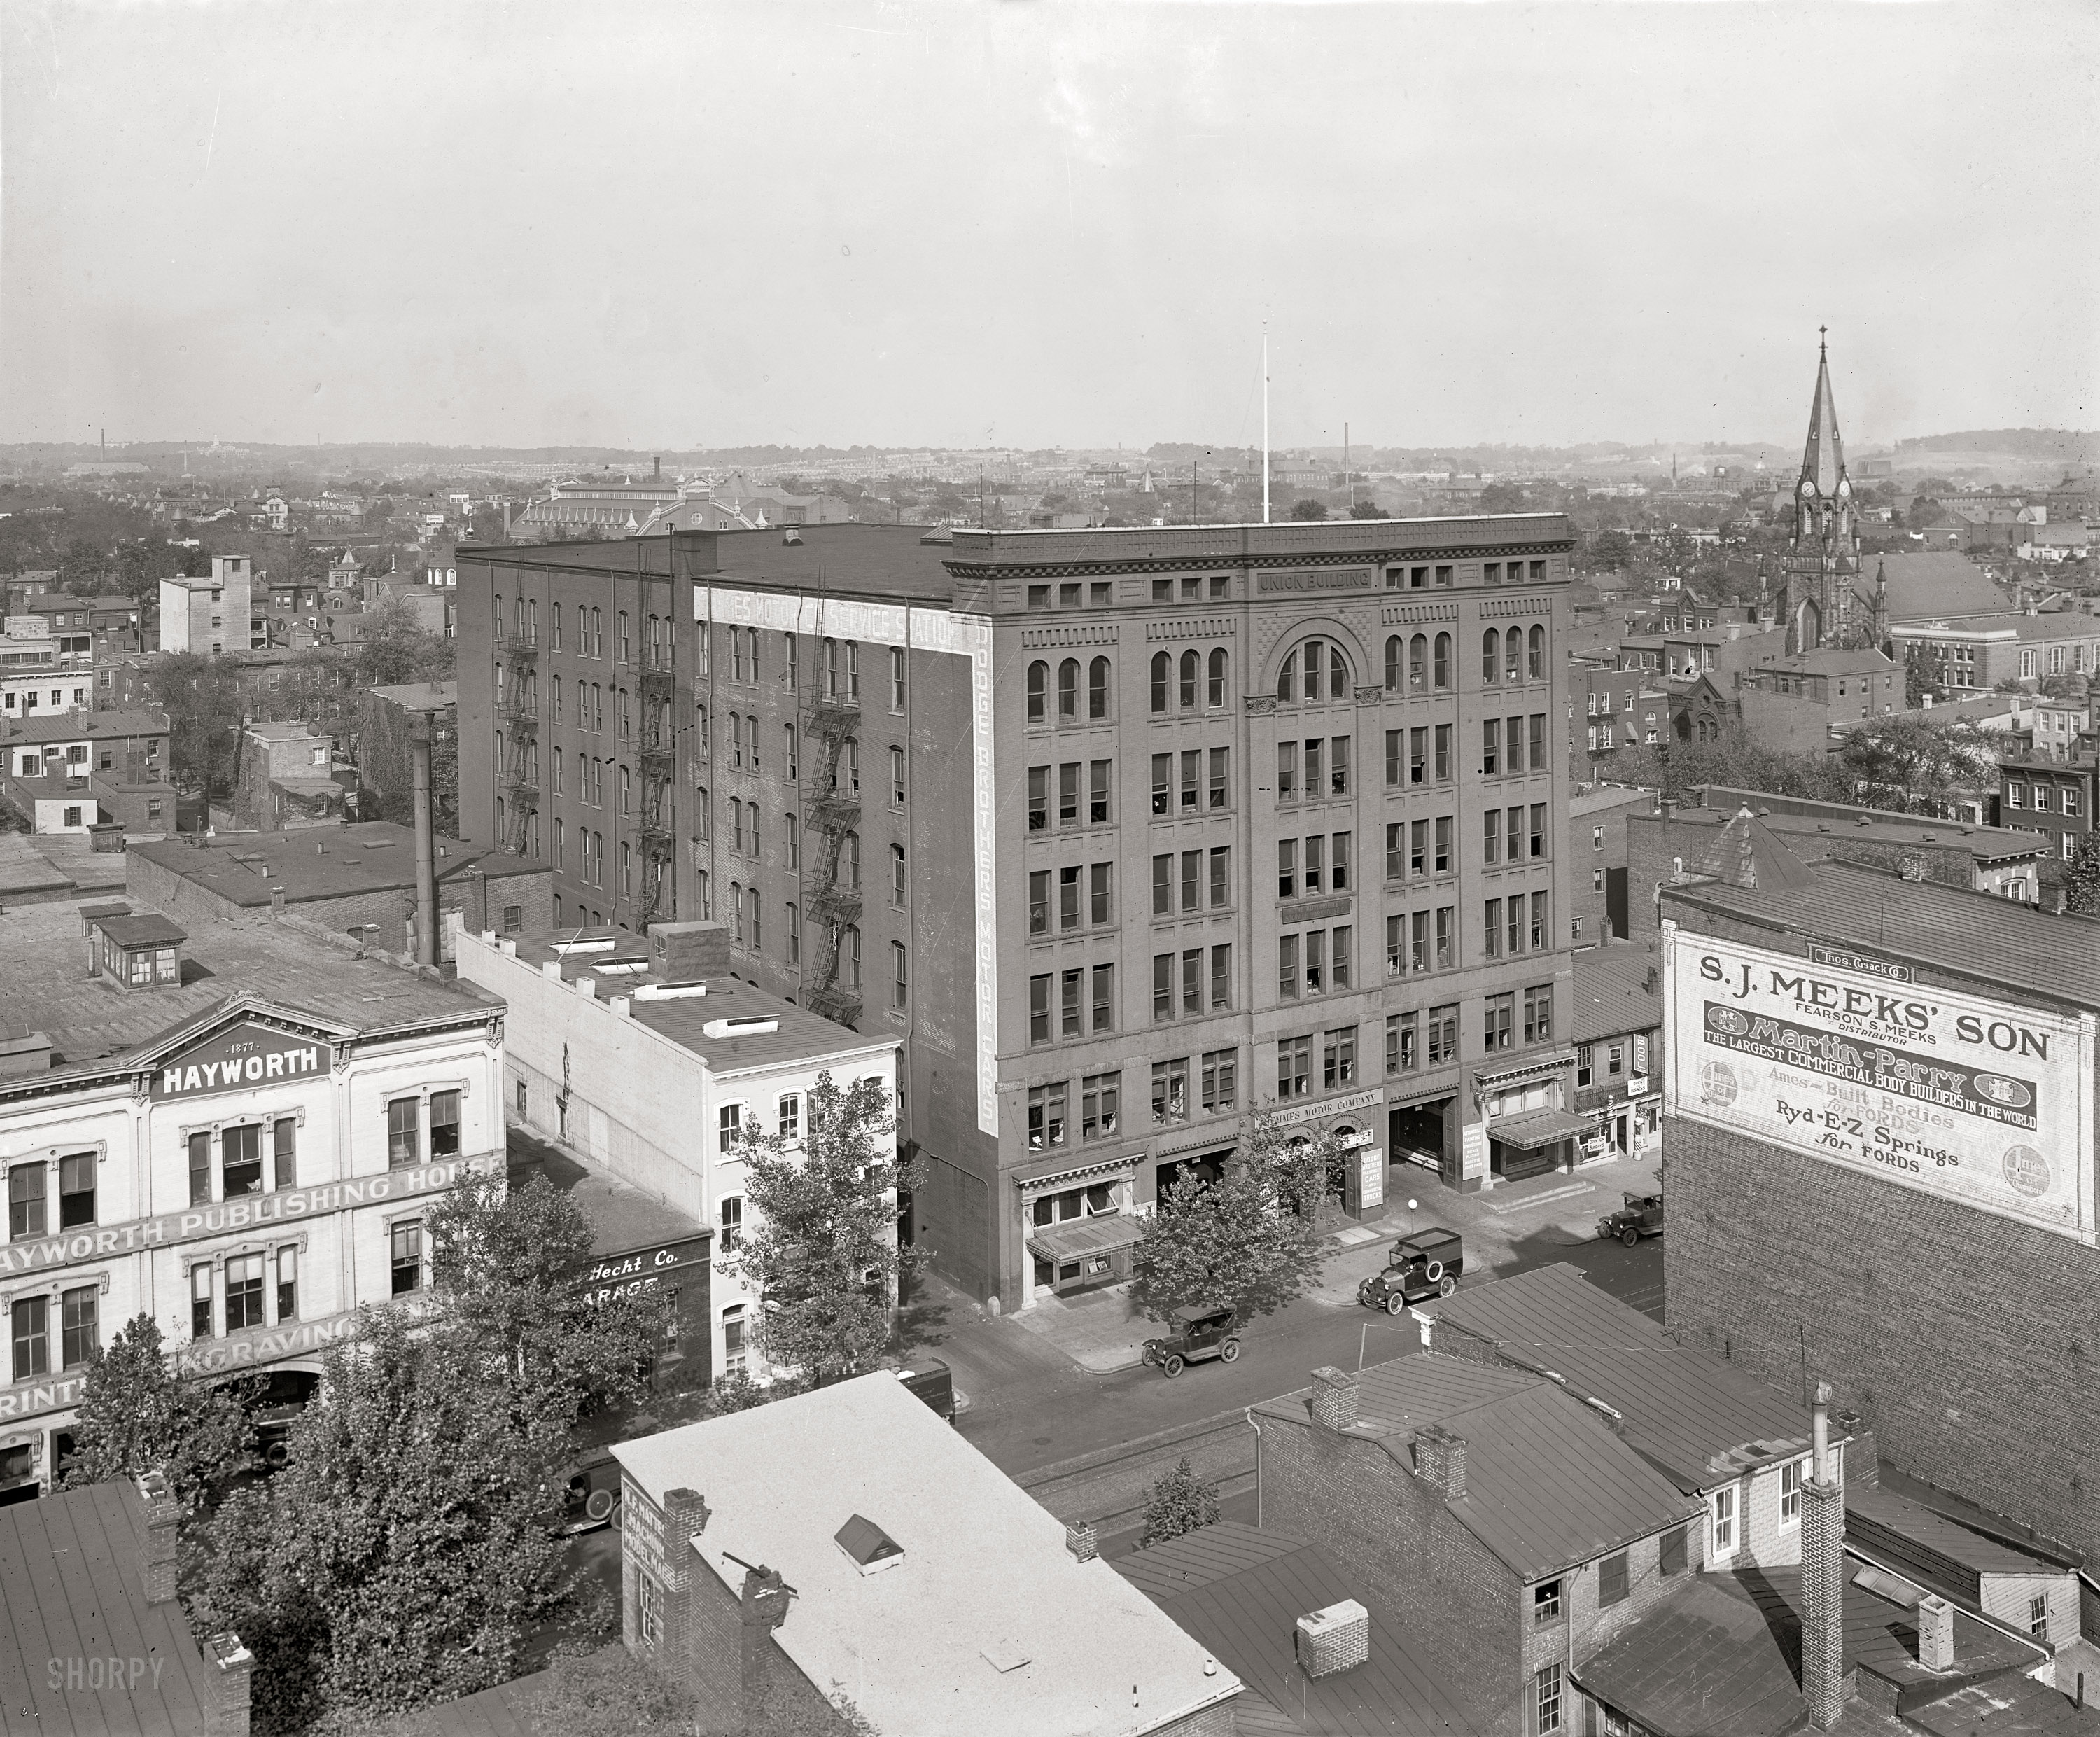 Washington circa 1924. "Union Garage." The Union Building on G Street, venue for the 1917 Auto Show. In July 1917 it was taken over by the Semmes Motor Company, offering 24-hour repair service as well as showrooms for Dodge and Hudson cars. National Photo Company glass negative. View full size.